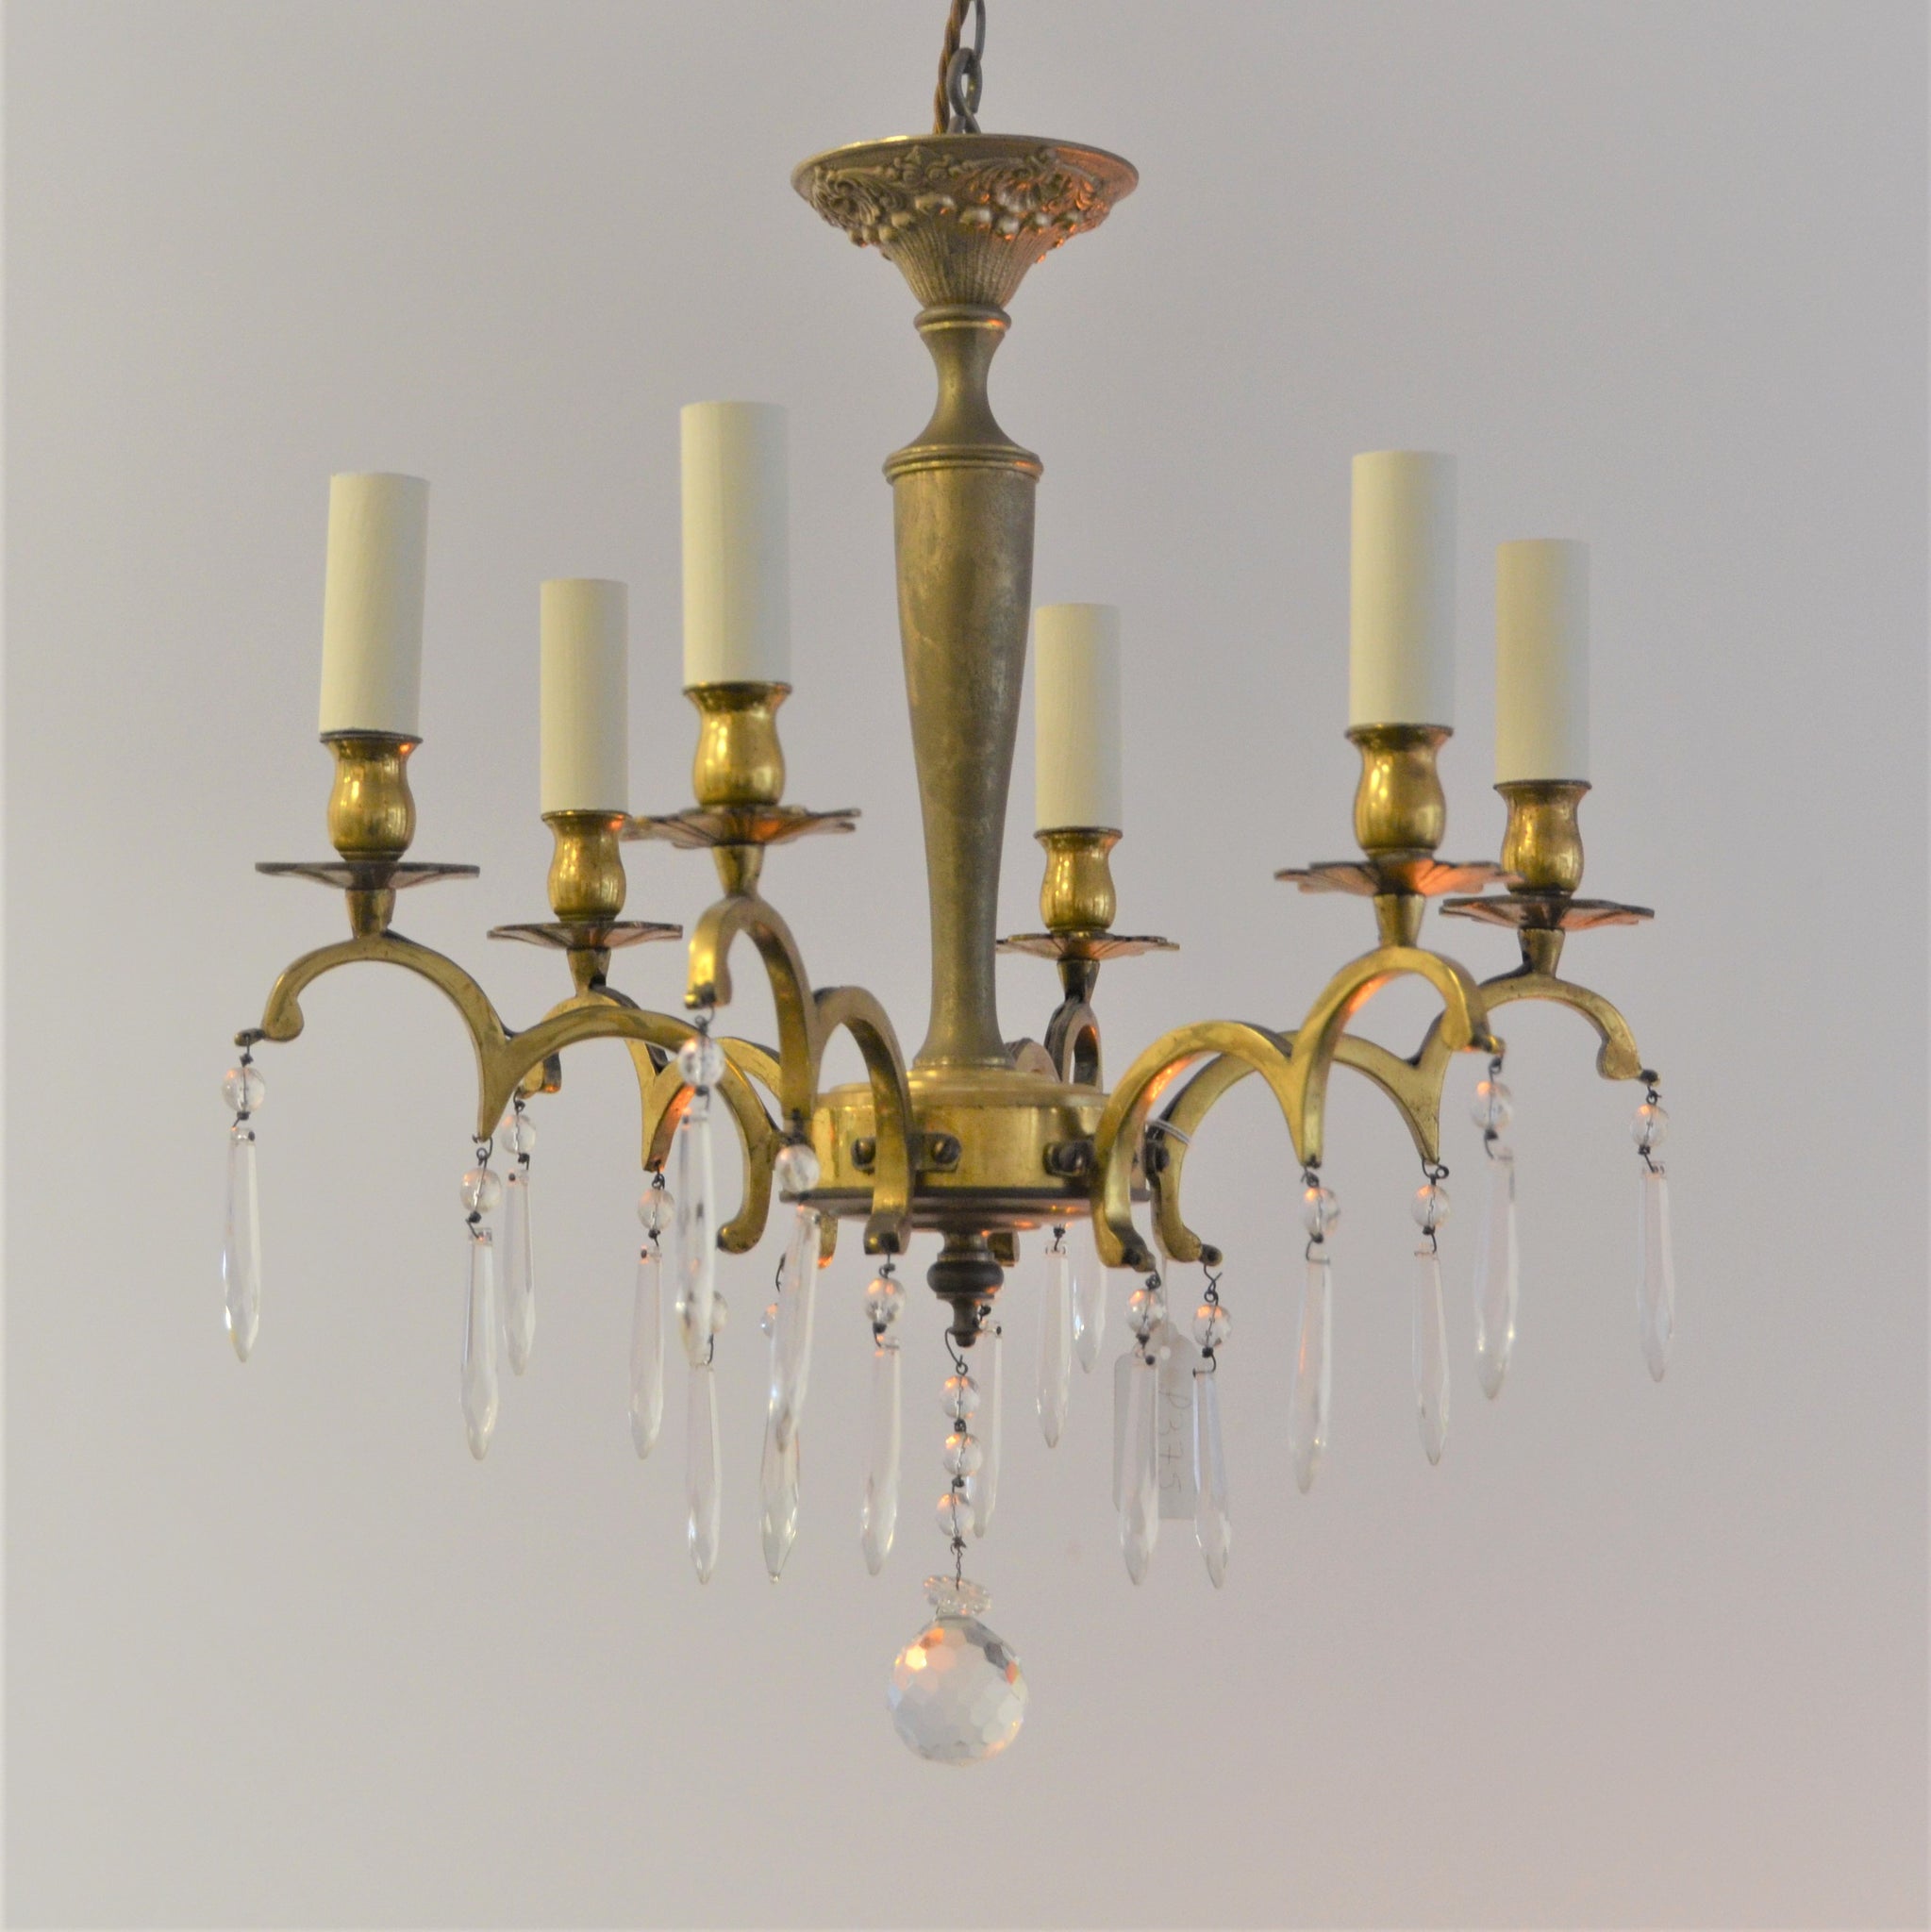 6 Arm Brass Chandelier With Drops – Light Fixation